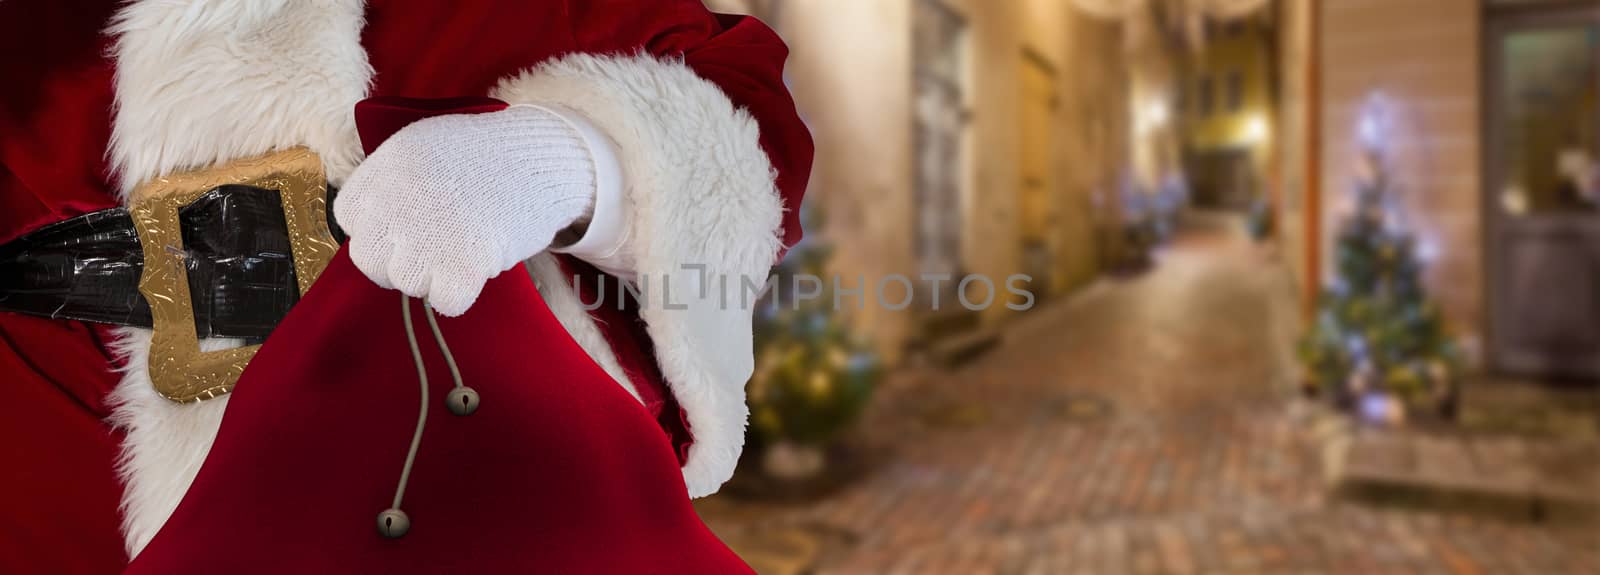 Christmas concept Santa claus standing on the streets of a small alley holding his bag full of presents by charlottebleijenberg